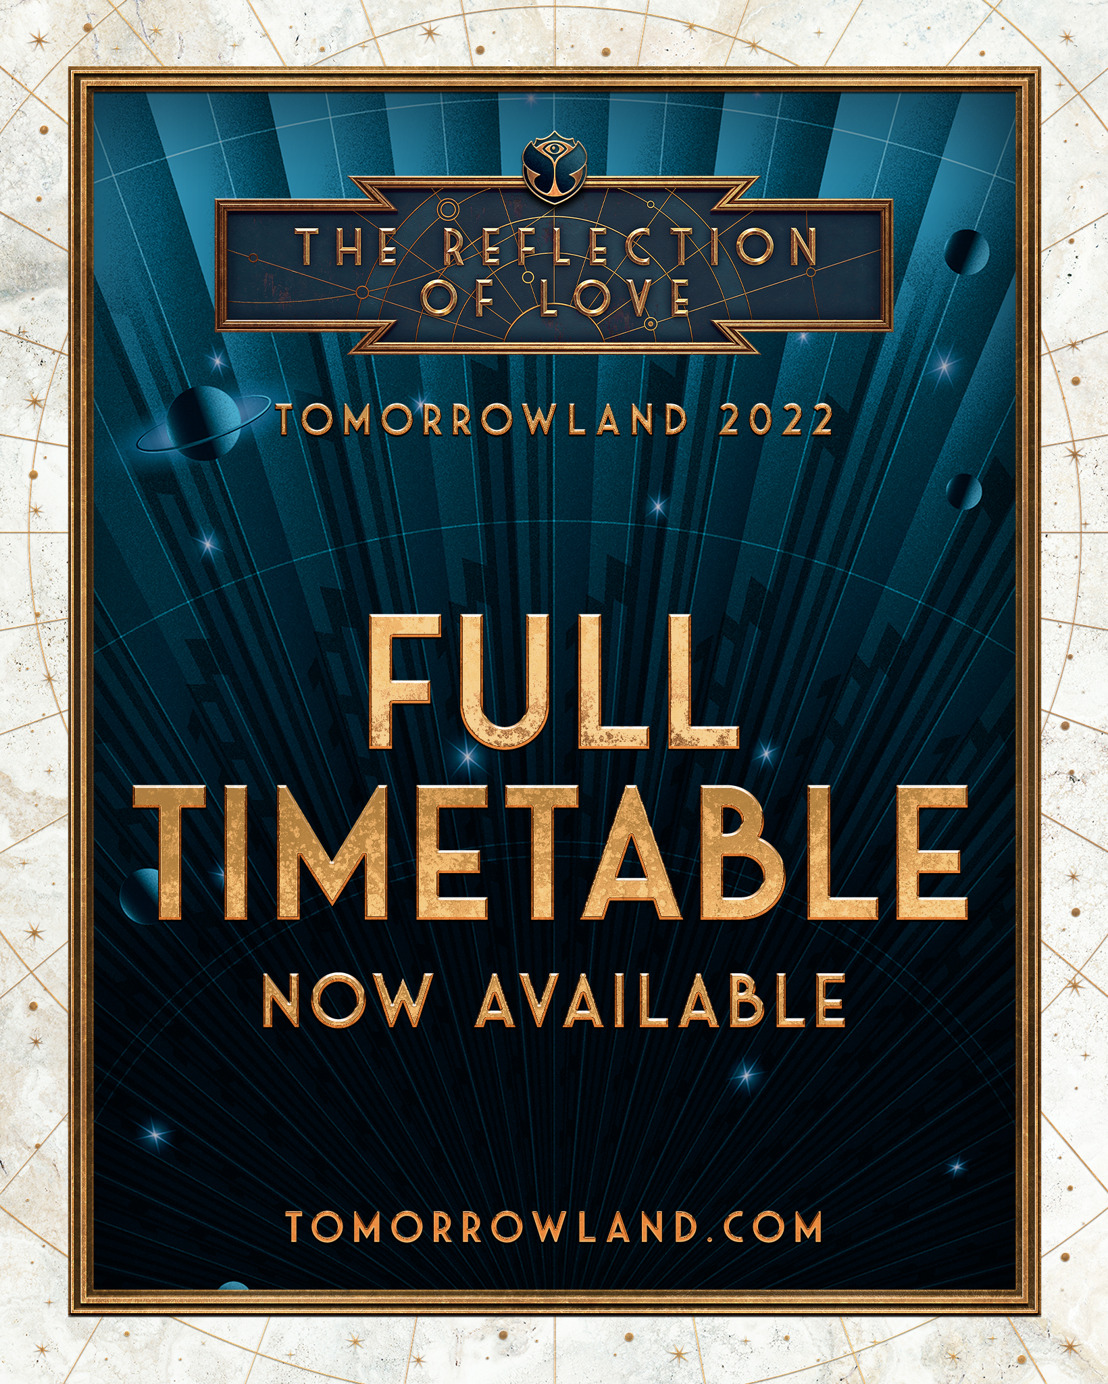 Dance with more than 800 of the world’s finest electronic artists and unite with people from across the world at Tomorrowland this summer